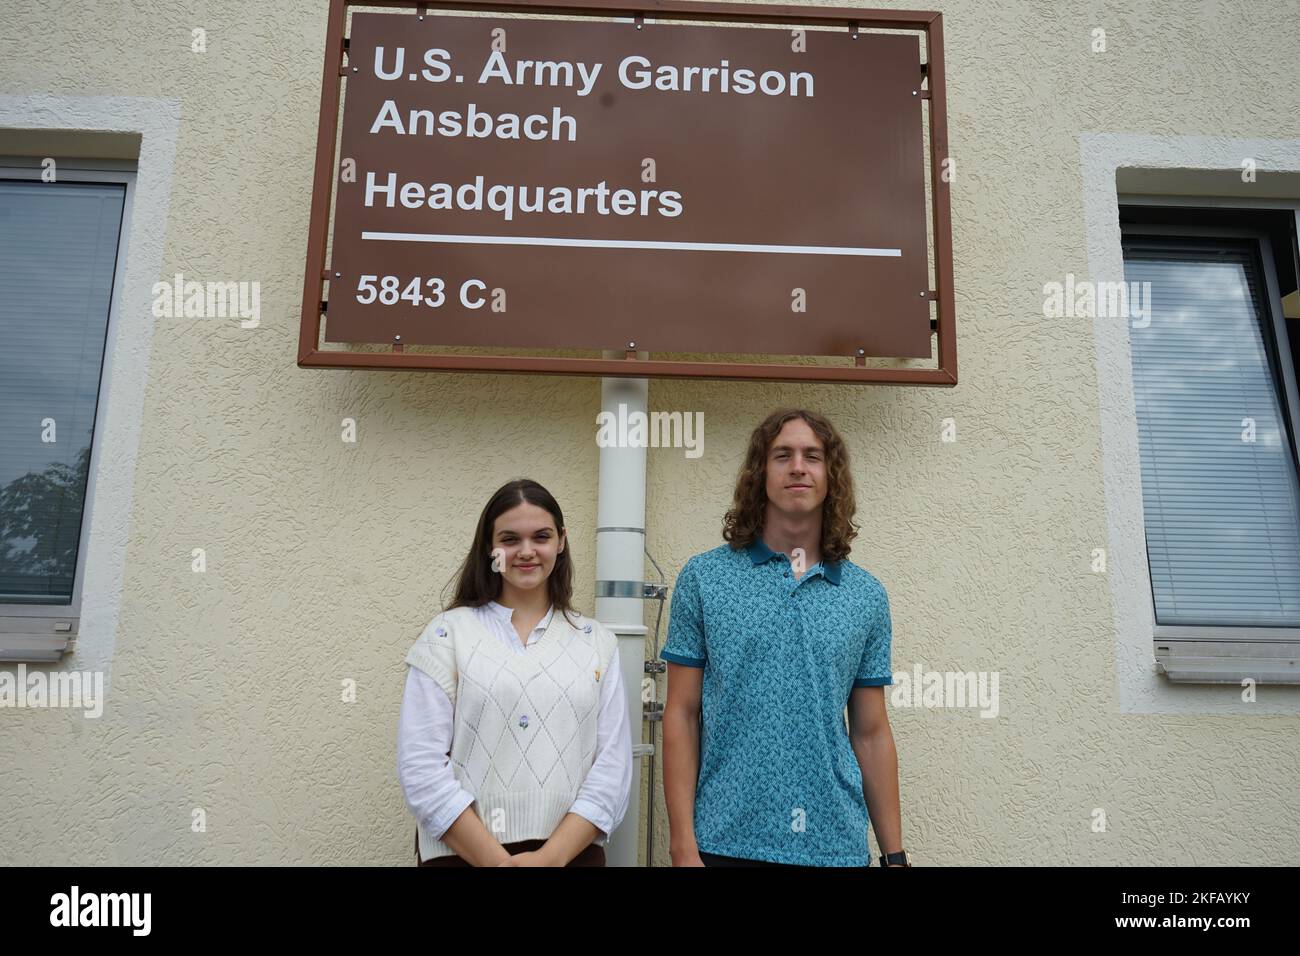 Mara Klijakovic-Gaspic, age 17 from Fürth, and Erik Heller, age 18 from Lichtenau, are two host-nation school graduates to undergo “Duale Ausbildung,” dual vocational training program at U.S. Army Garrison (USAG) Ansbach for the first time in known history. Over a duration of 36 months, USAG Ansbach will provide the trainees, called Auszubildende, or Azubis in German, on-the-job training three to four days per week, while the German Berufsschule, the vocational school, takes care of the theoretical academic lectures on one to two days a week and complements the in-company training. Stock Photo